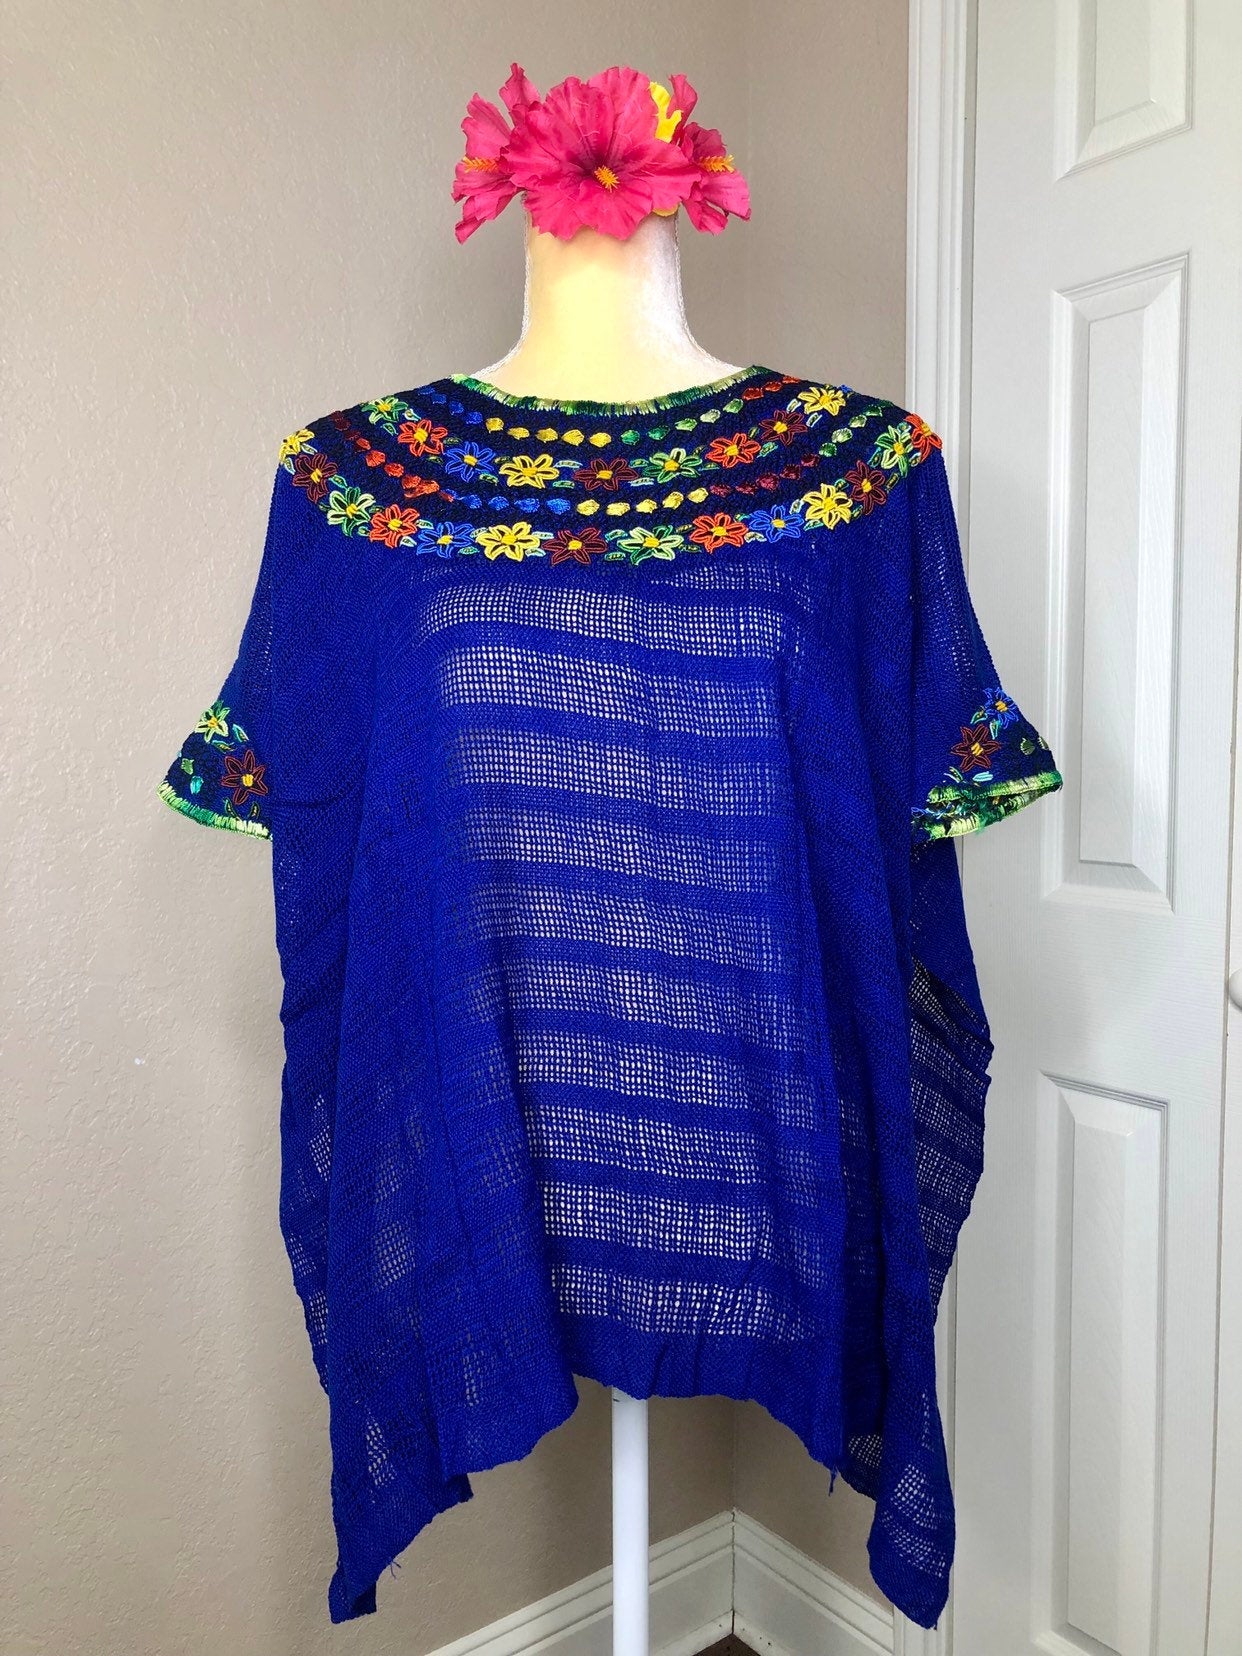 Handwoven Mexican Embroidery Huipil, Embroidere Blue Cape